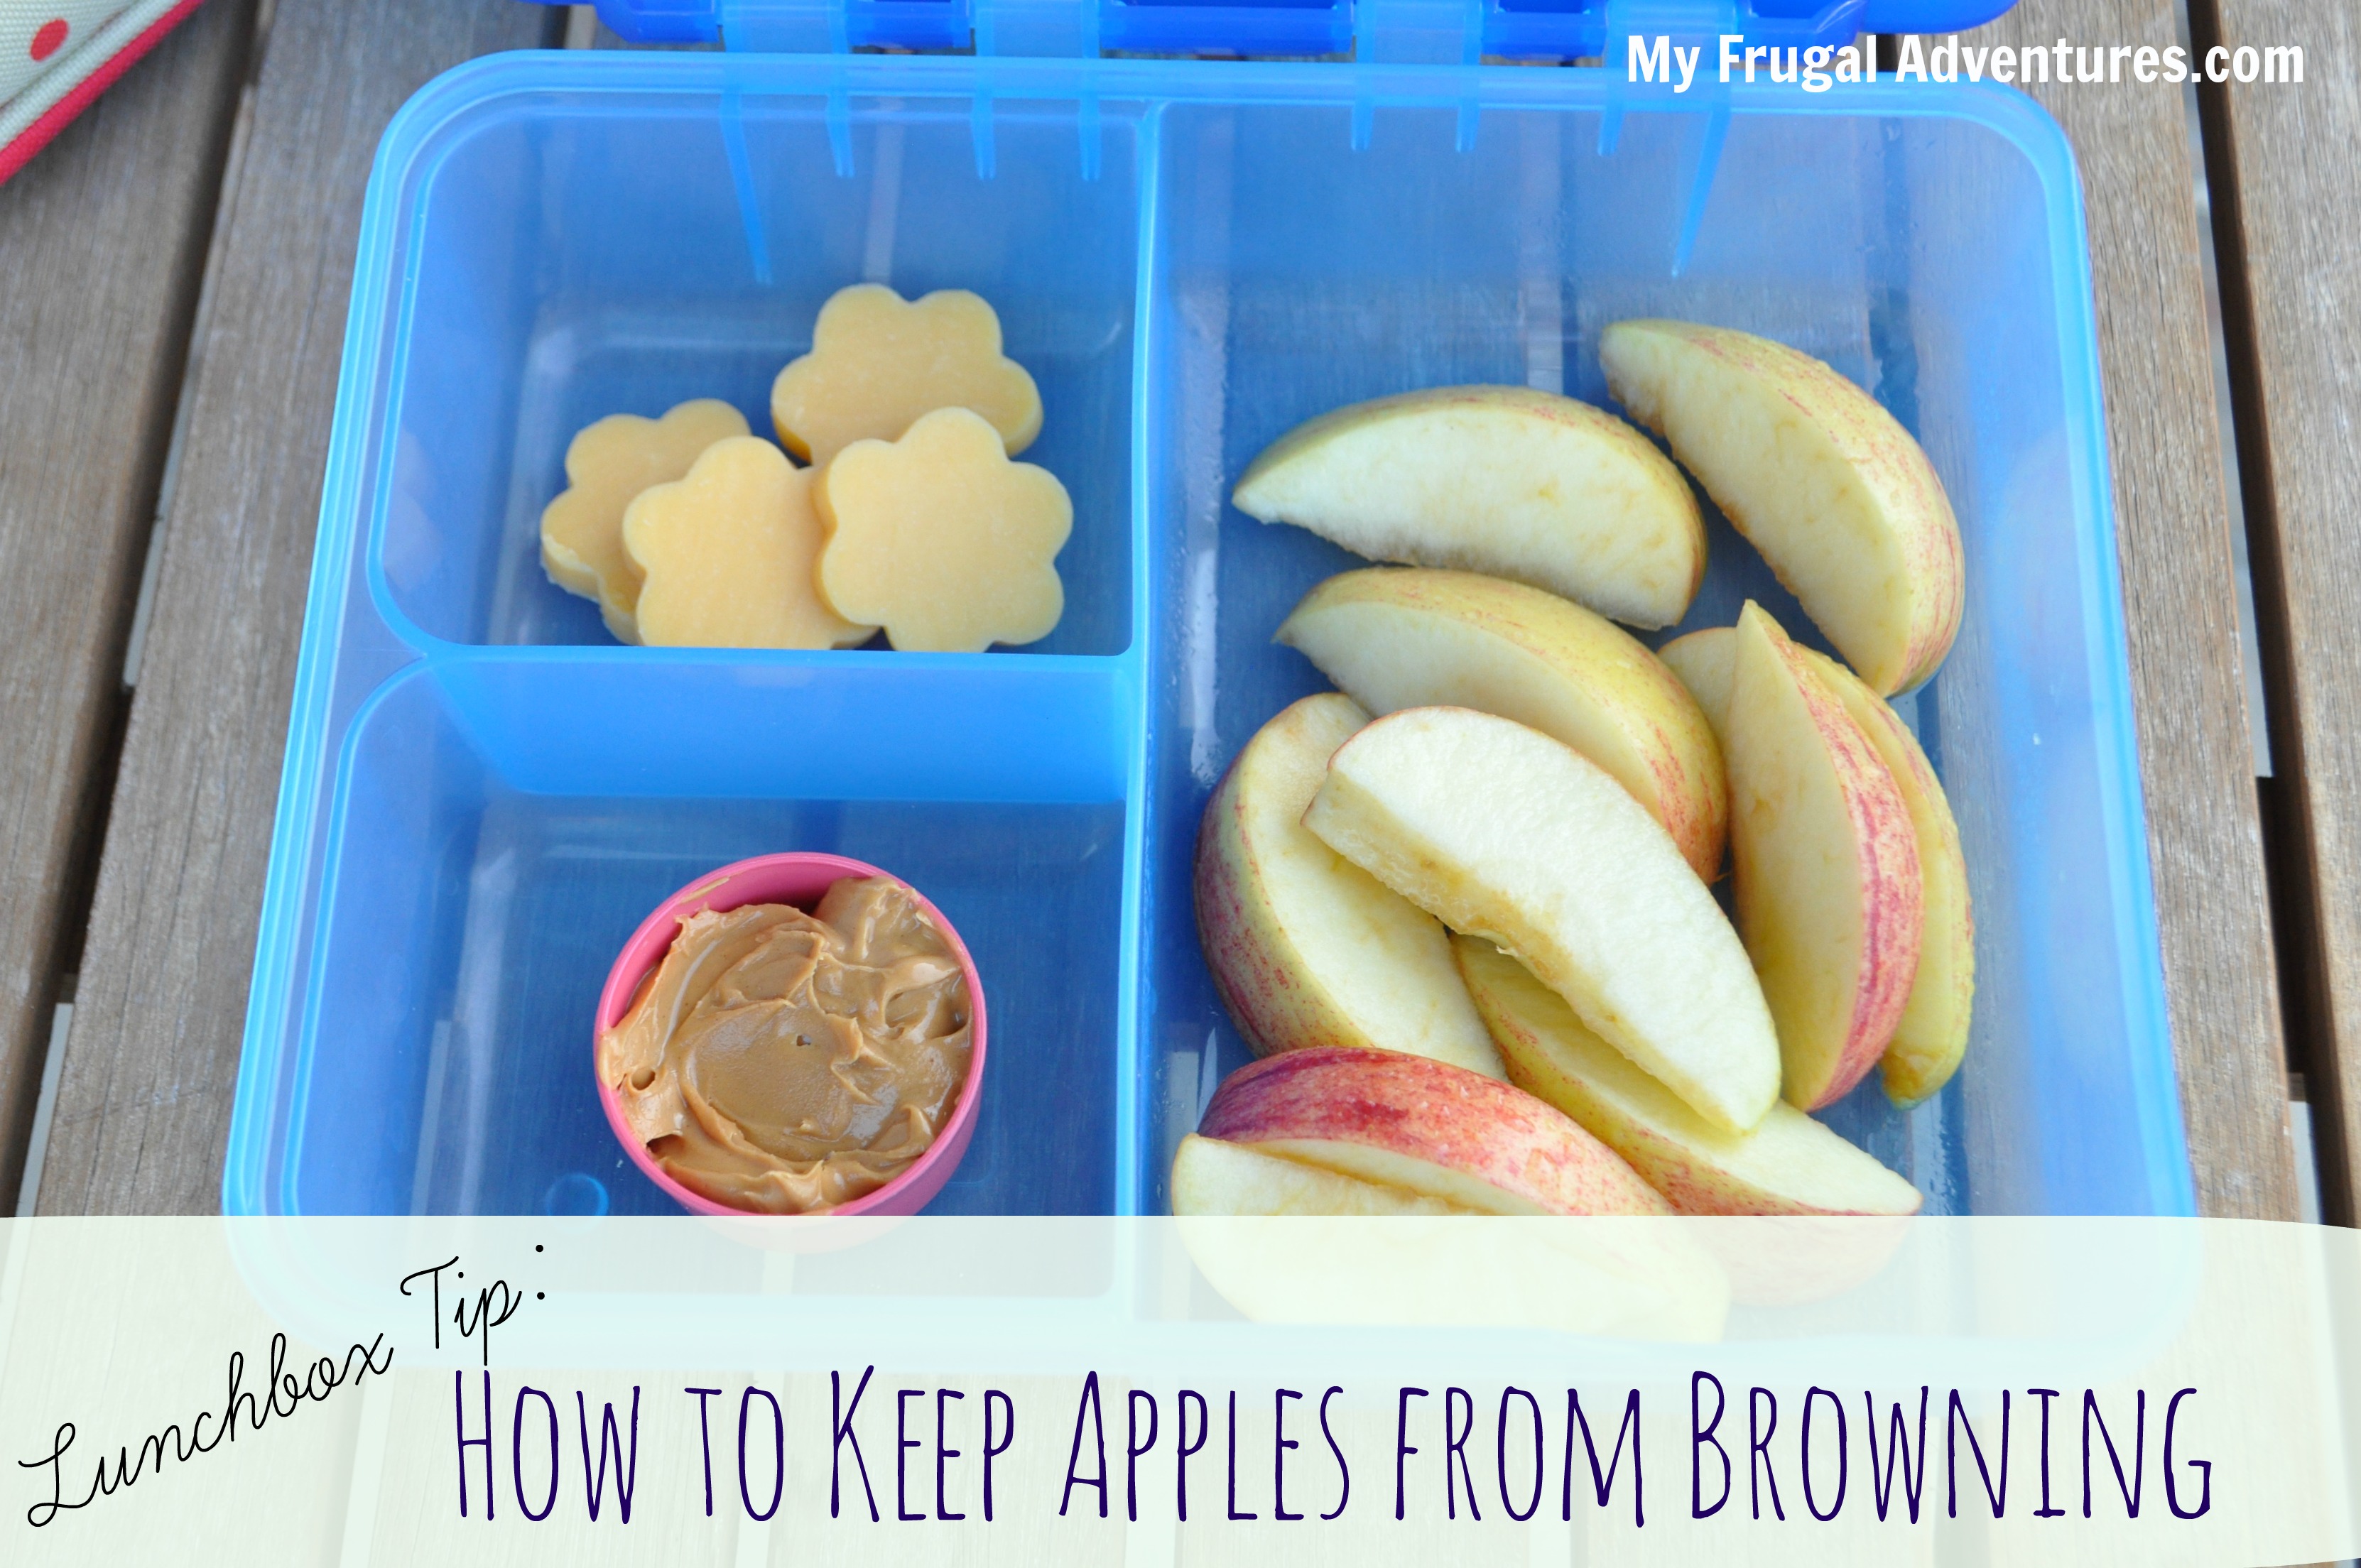 The Best Way to Keep Apples from Browning